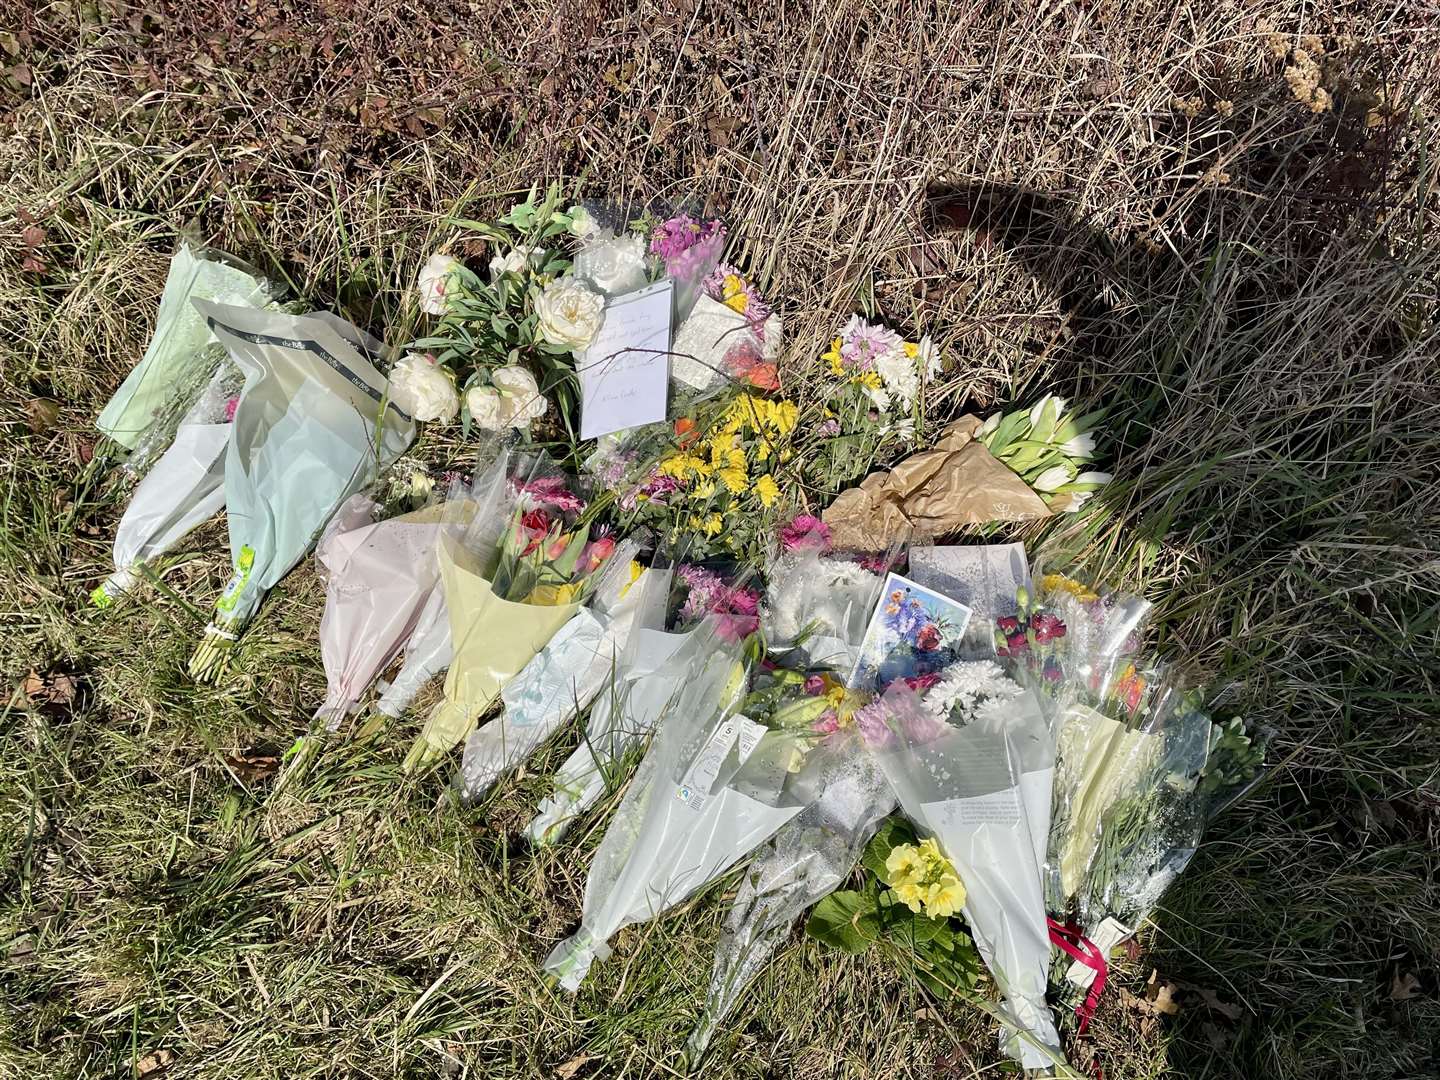 Up to 20 bunches of flowers have been laid along the A257